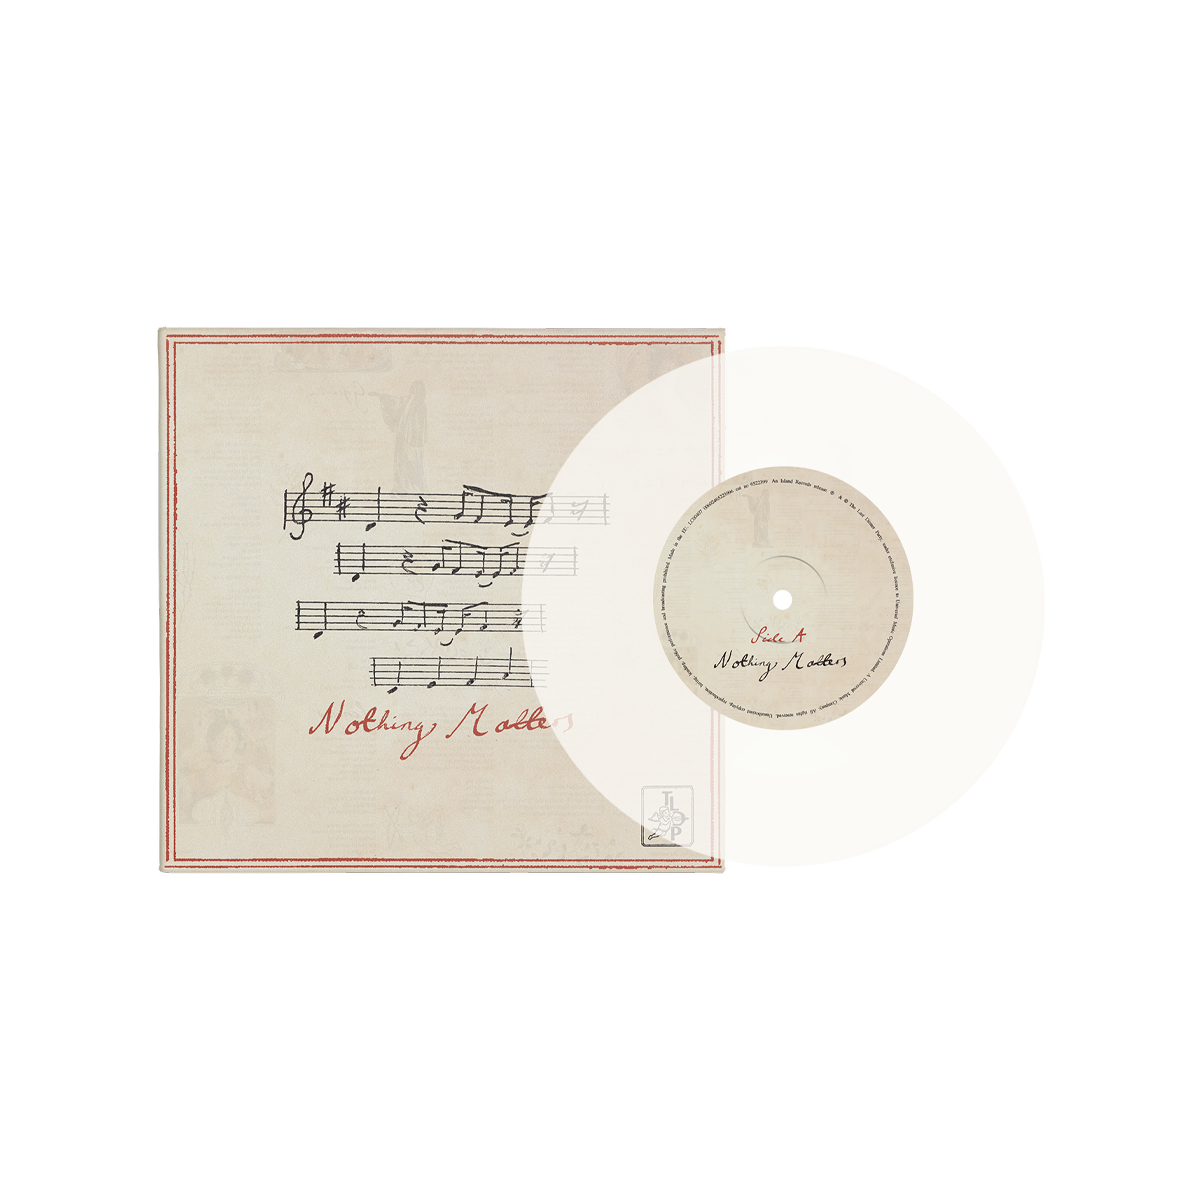 The Last Dinner Party - Nothing Matters: Crystal Clear Vinyl 7” Single